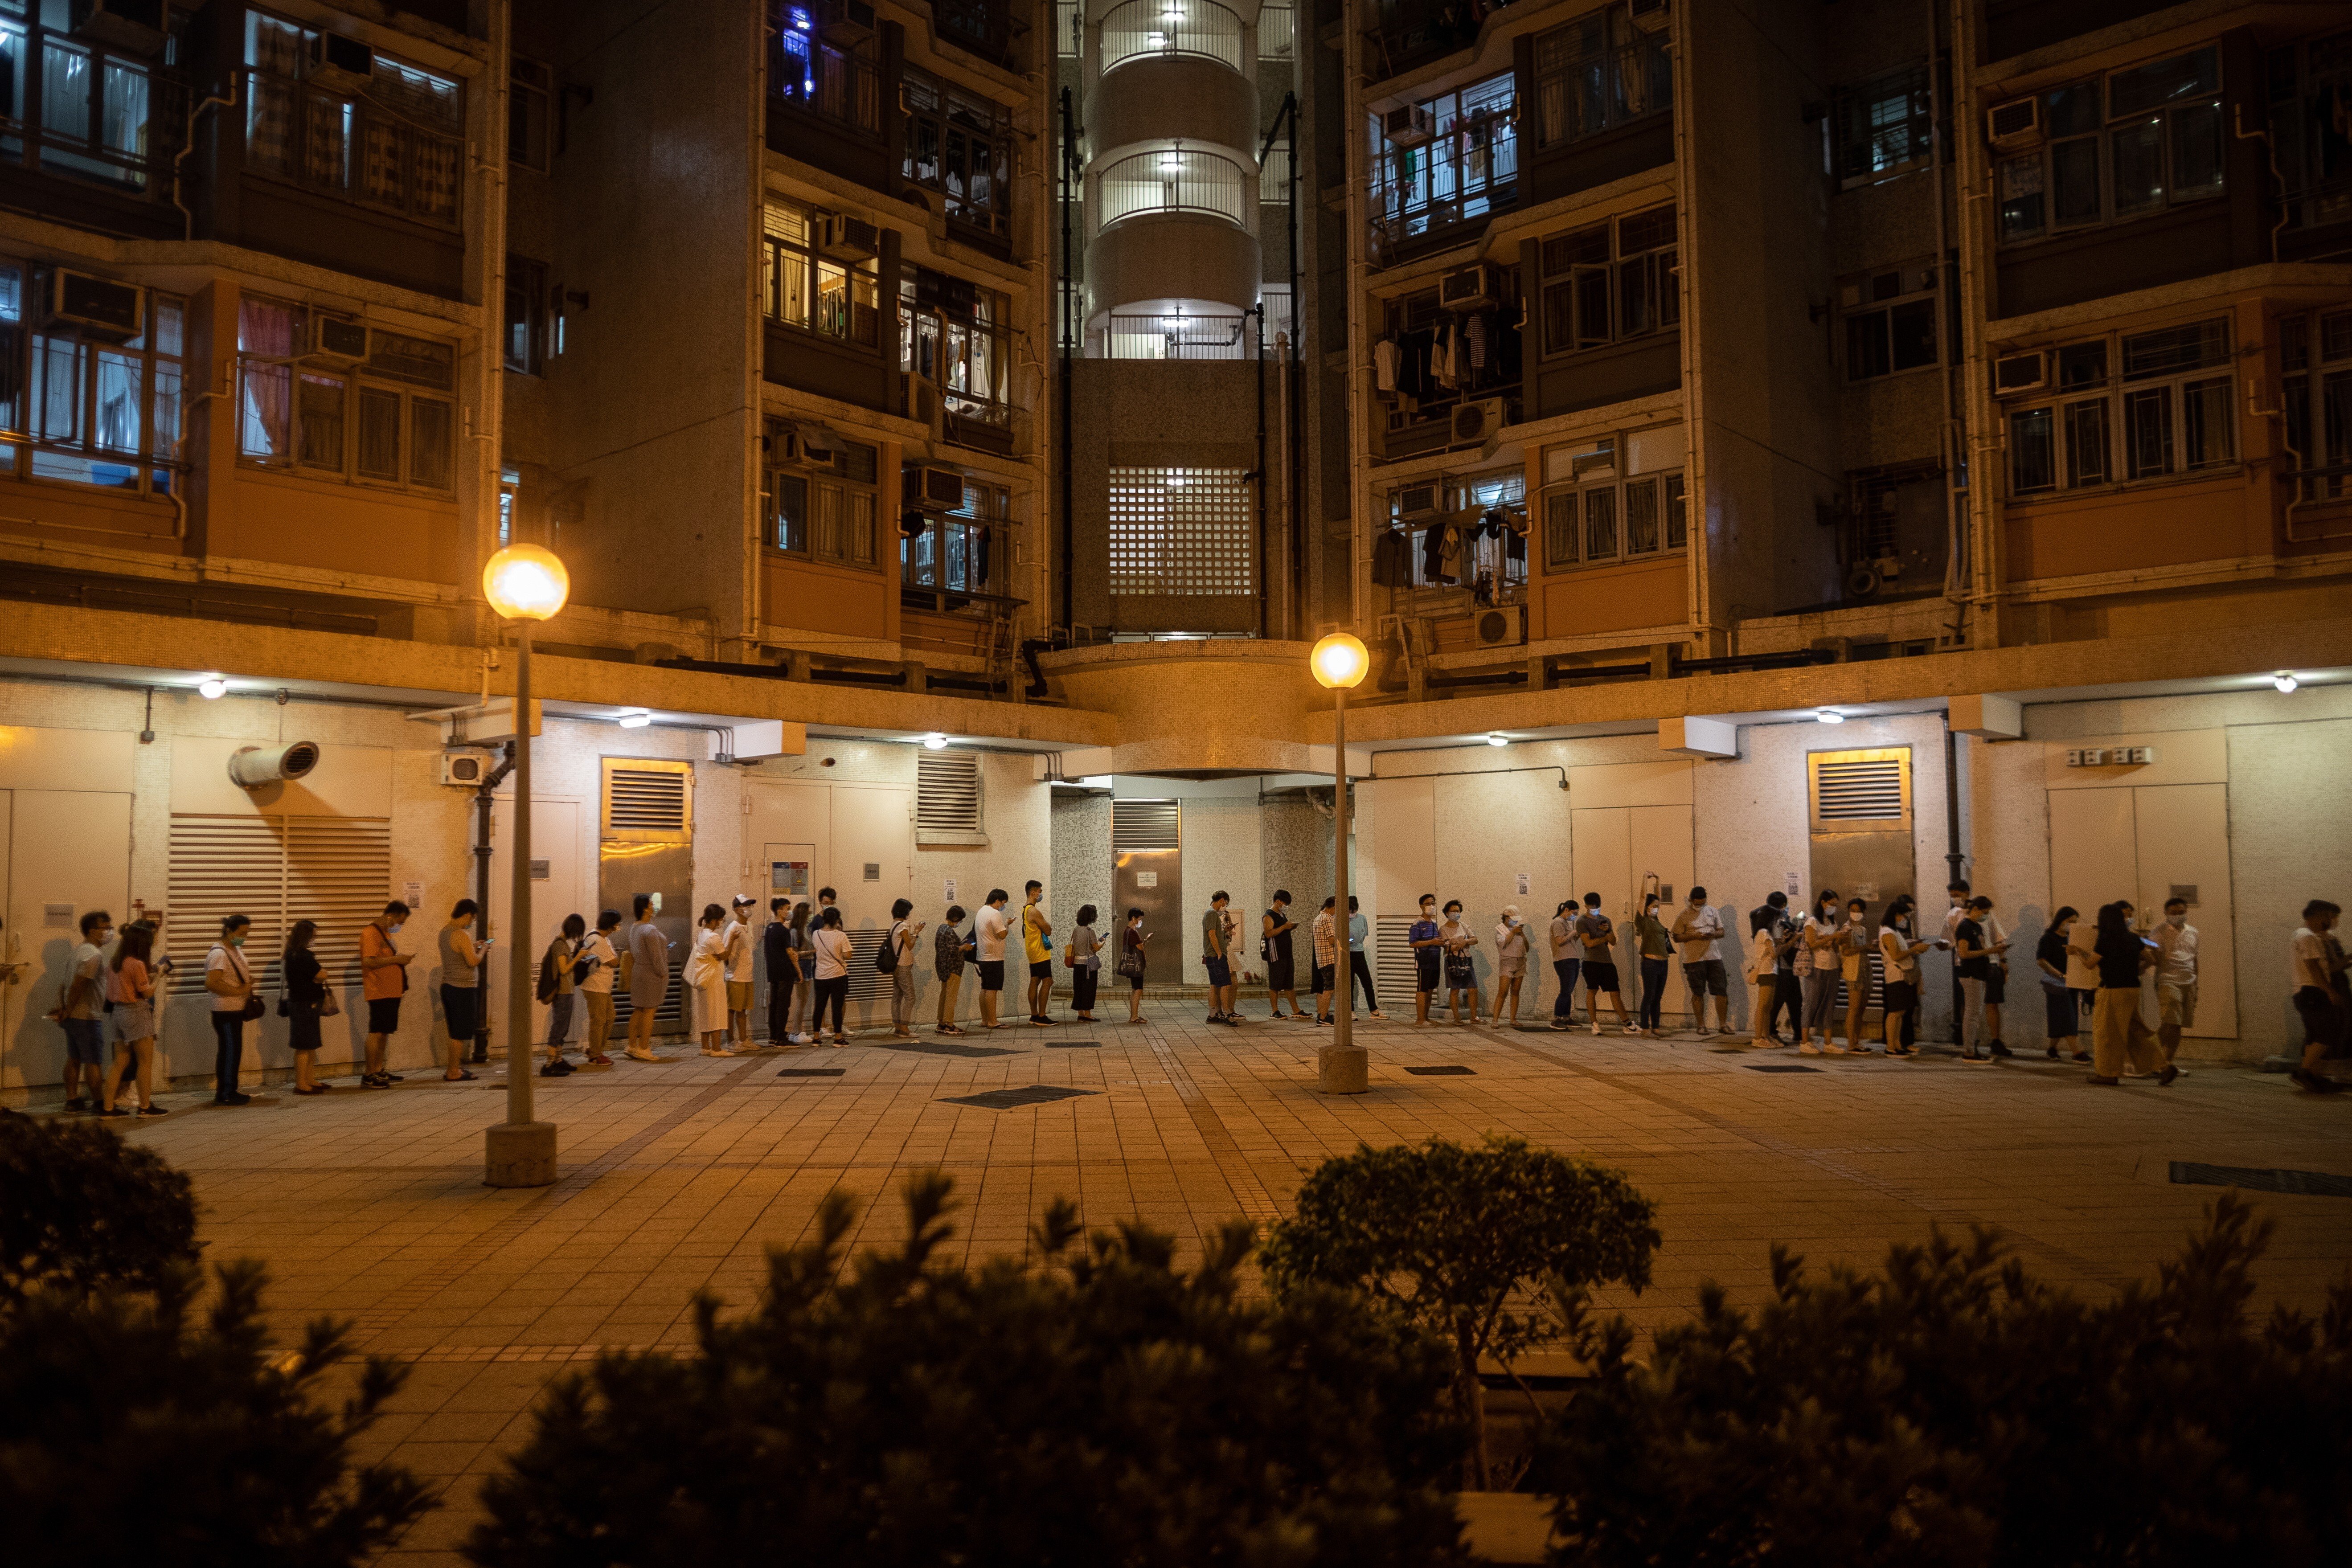 Voters wait in line during the “35-plus” primaries on July 11, 2020, held to select pro-democrat candidates for the since postponed Legislative Council elections in Hong Kong. Photo: EPA-EFE